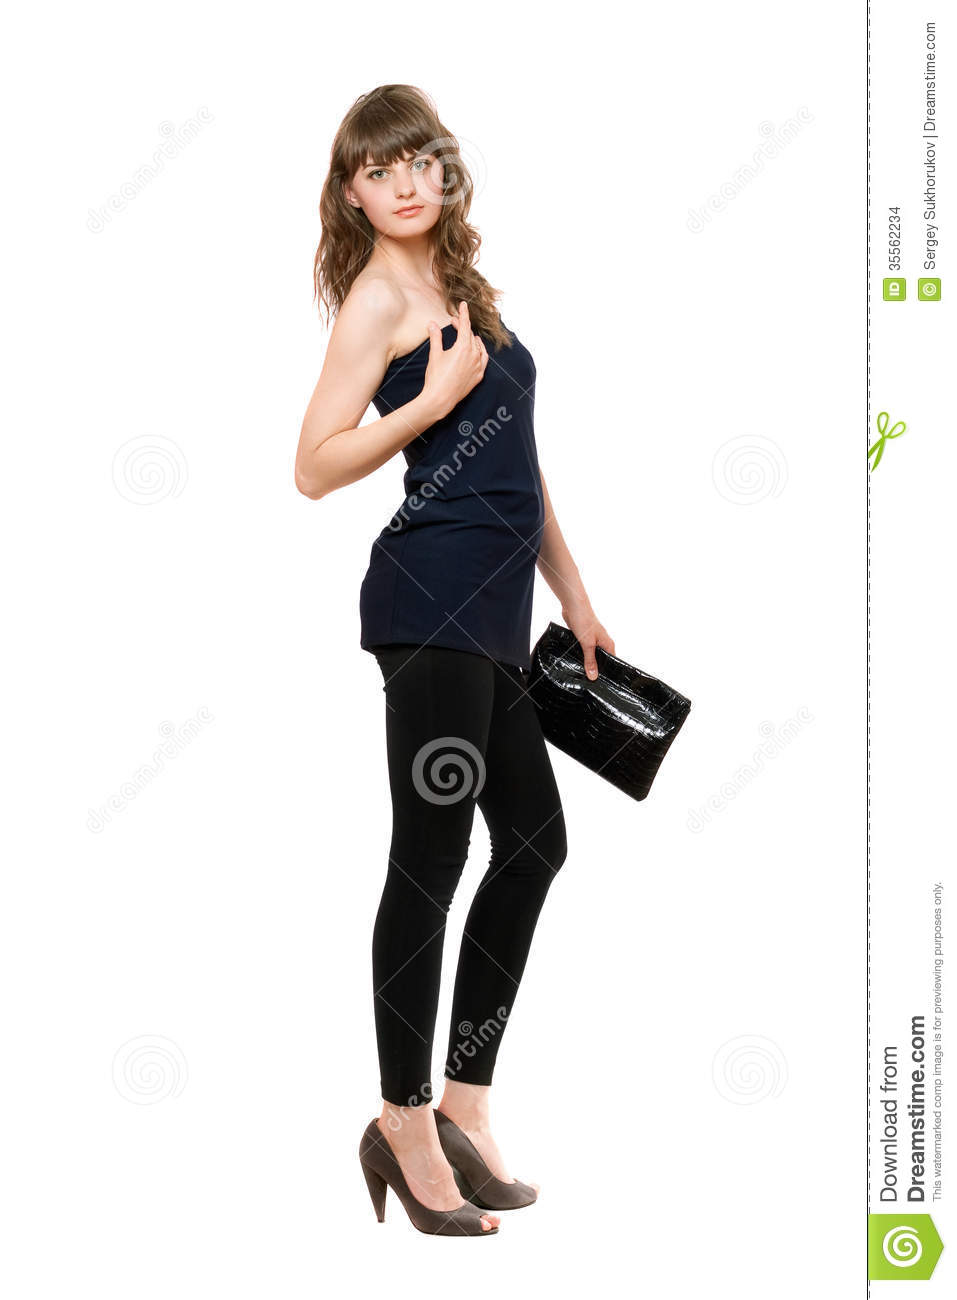 Nice Girl In Black Leggings With A Handbag Stock Images   Image